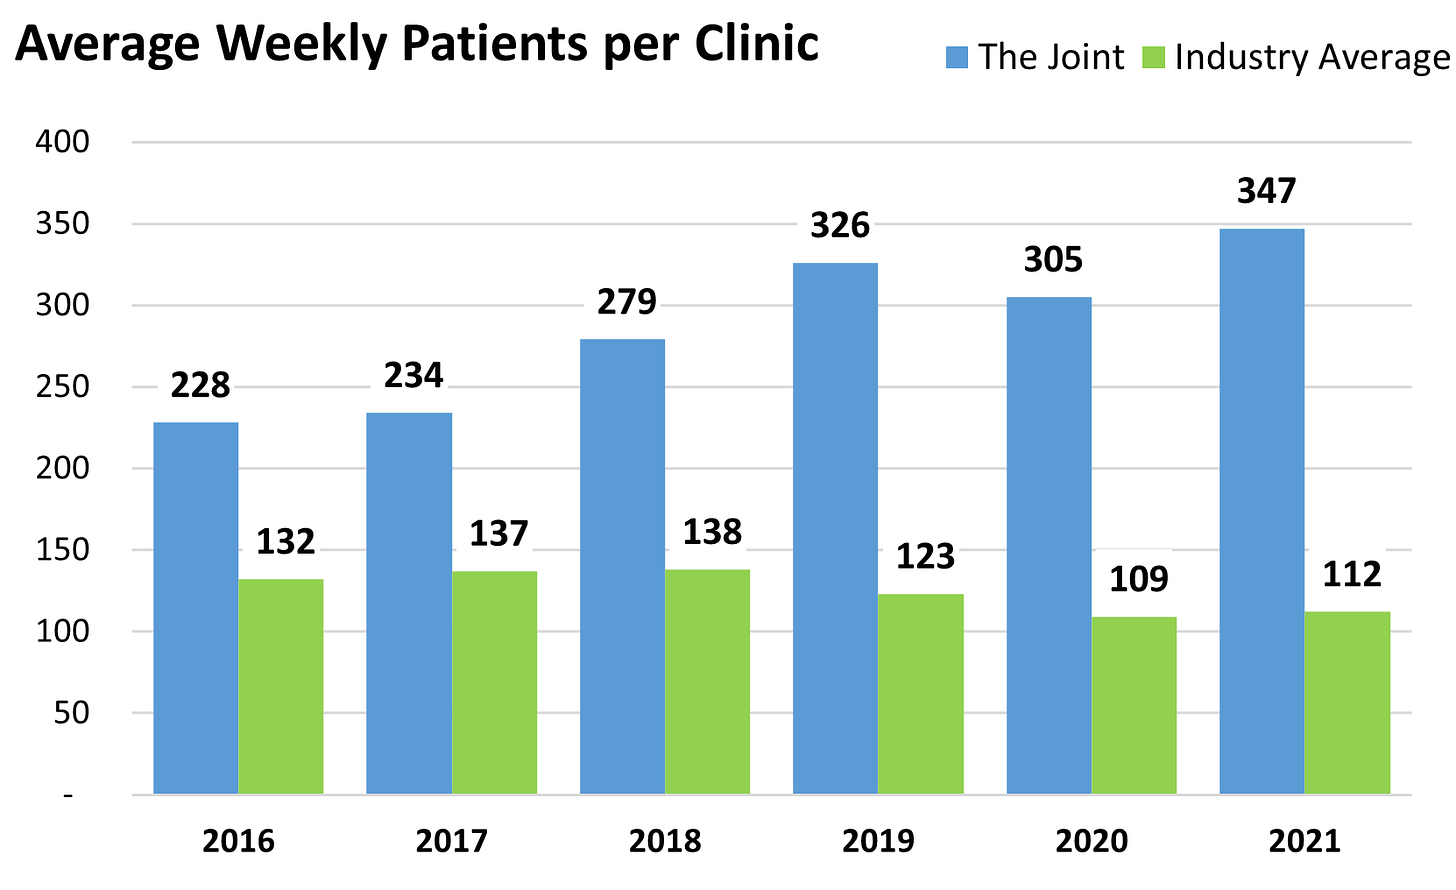 The Joint Weekly Patients versus Industry